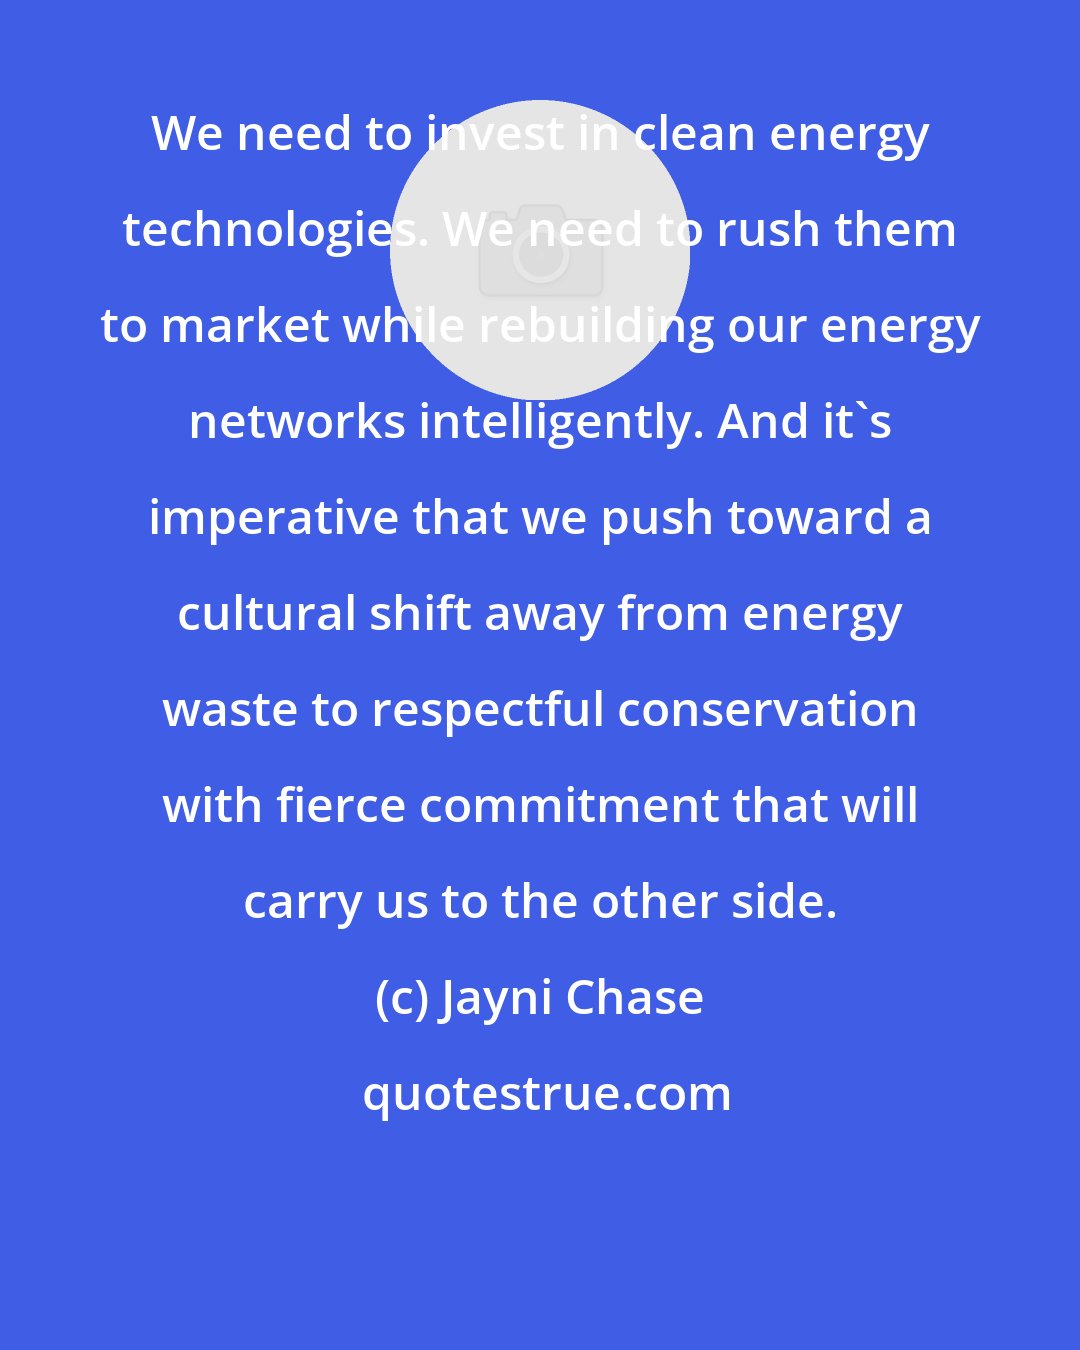 Jayni Chase: We need to invest in clean energy technologies. We need to rush them to market while rebuilding our energy networks intelligently. And it's imperative that we push toward a cultural shift away from energy waste to respectful conservation with fierce commitment that will carry us to the other side.